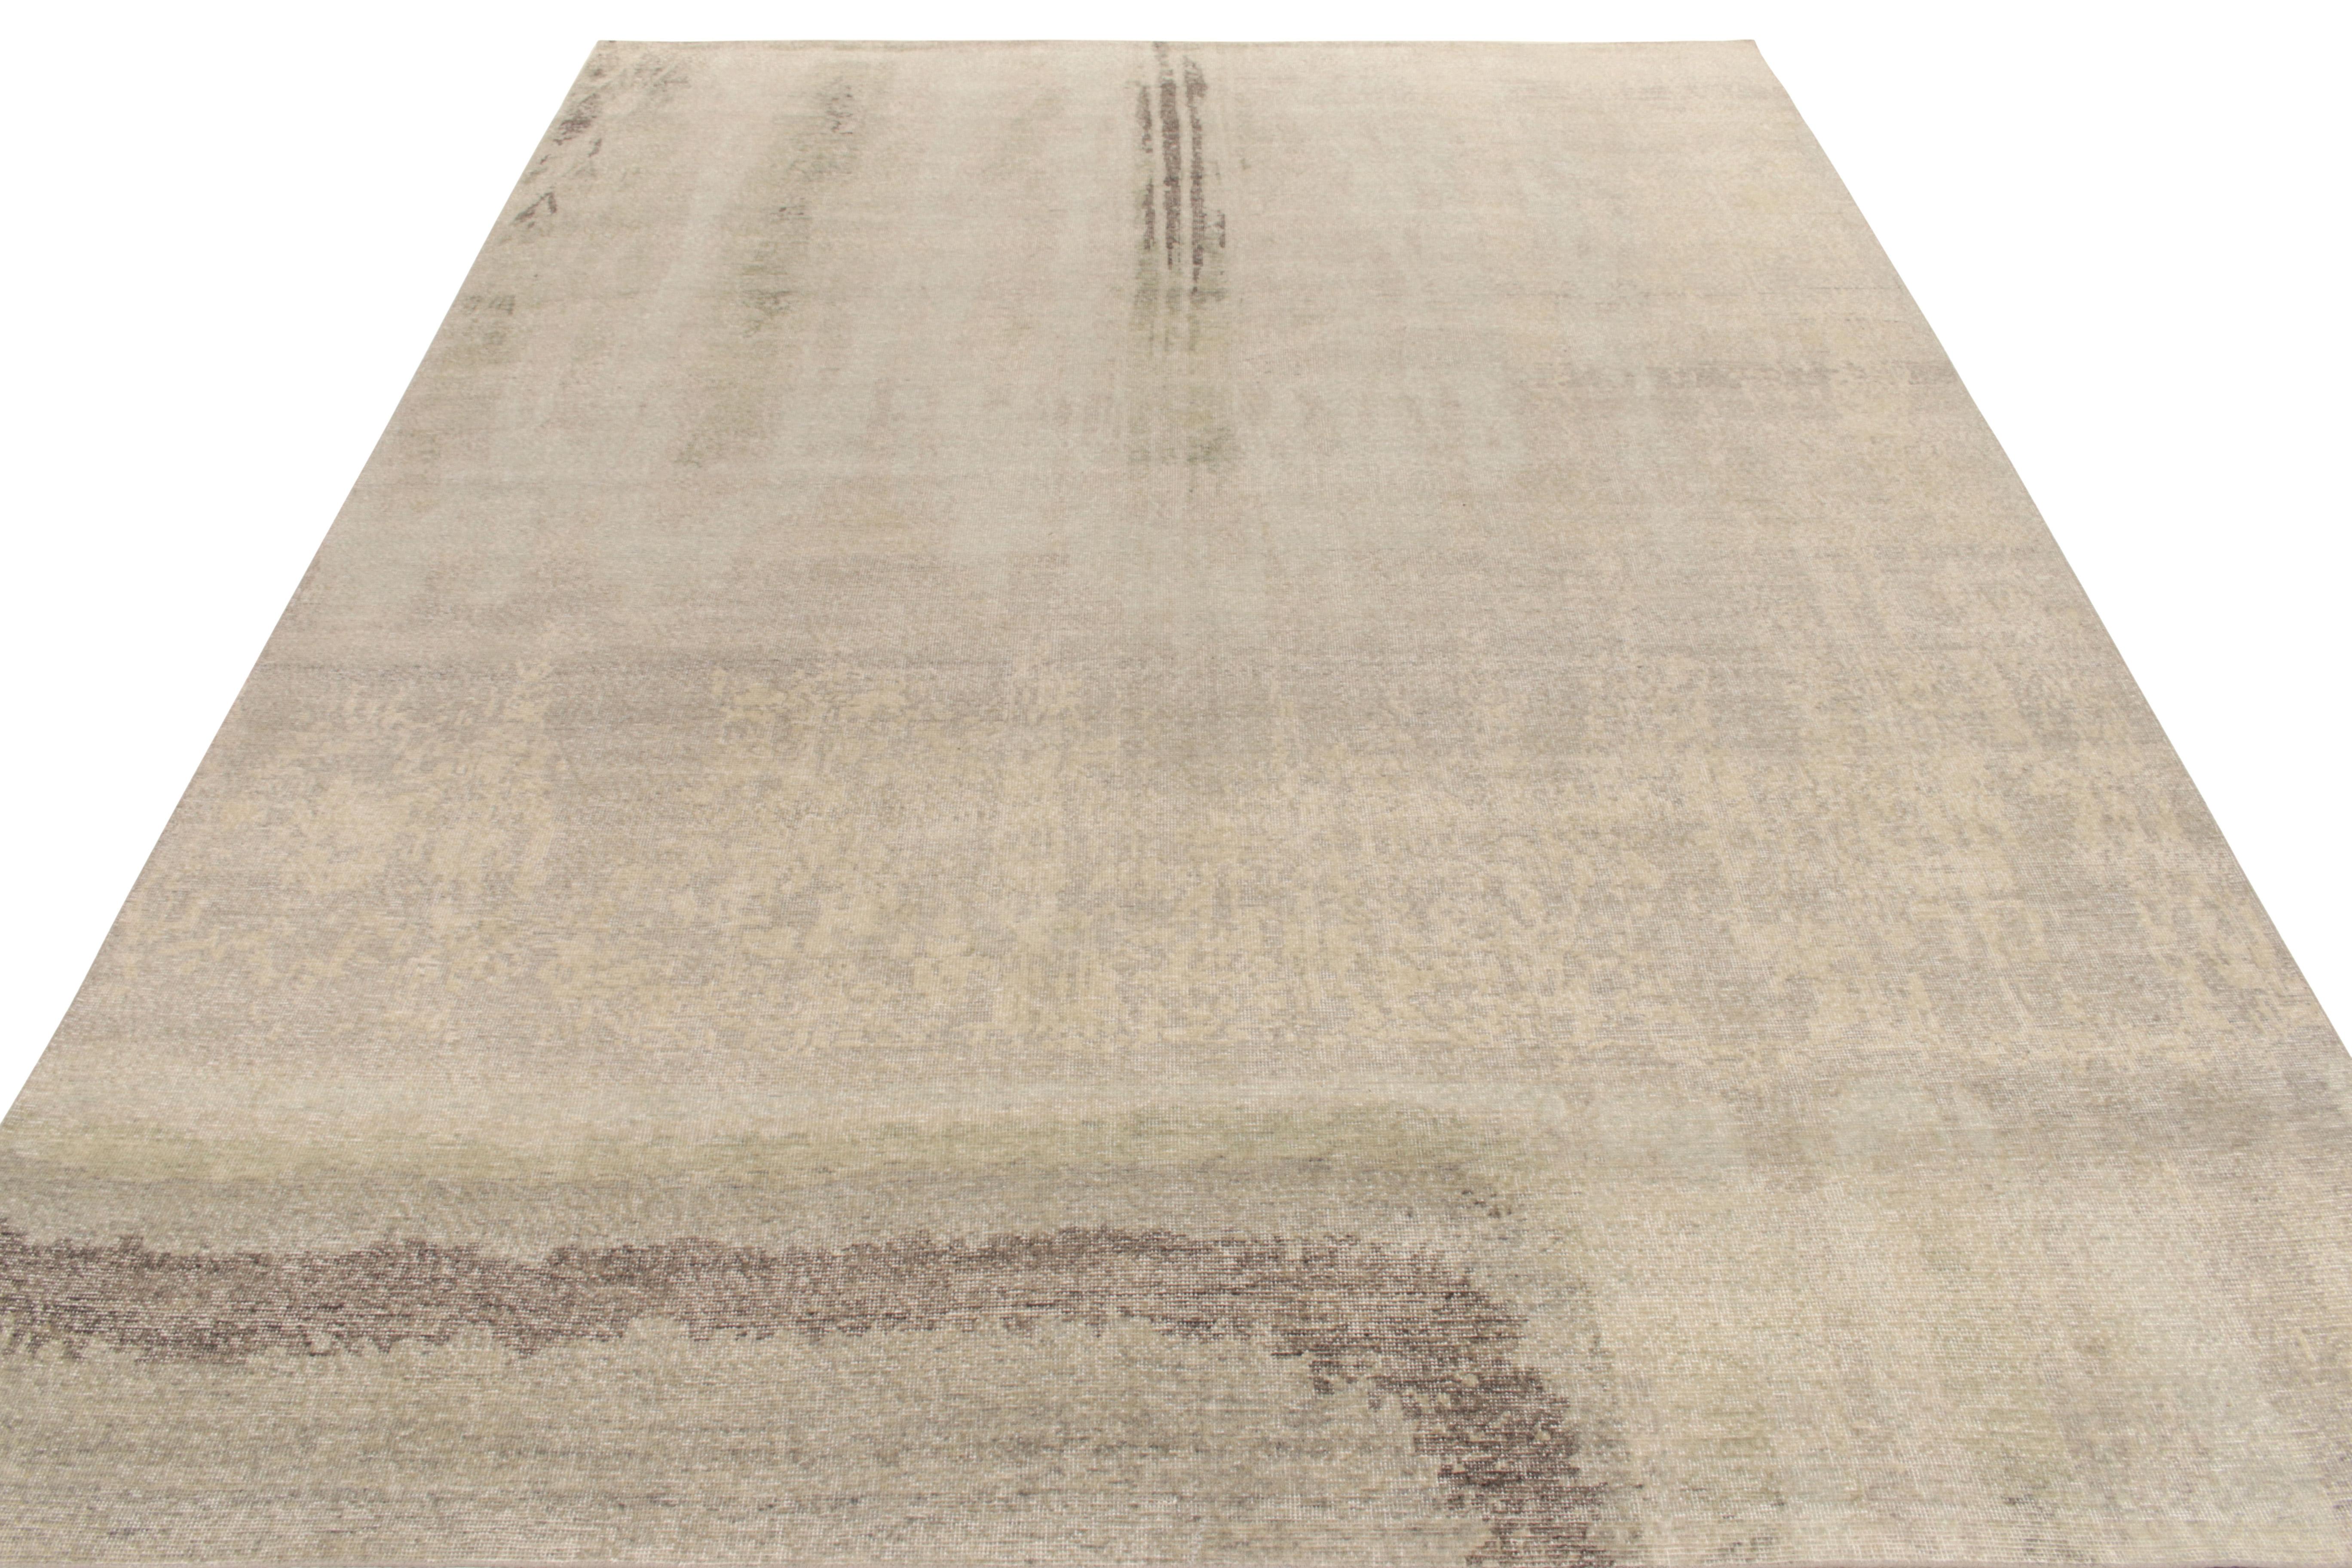 A 10 x 14 hand-knotted wool rug from the Homage Collection by Rug & Kilim. Enjoying handsome hues of beige-brown, blue and gray in a painterly abstract rug pattern, beautifully married with this collection’s textural take on distressed style.